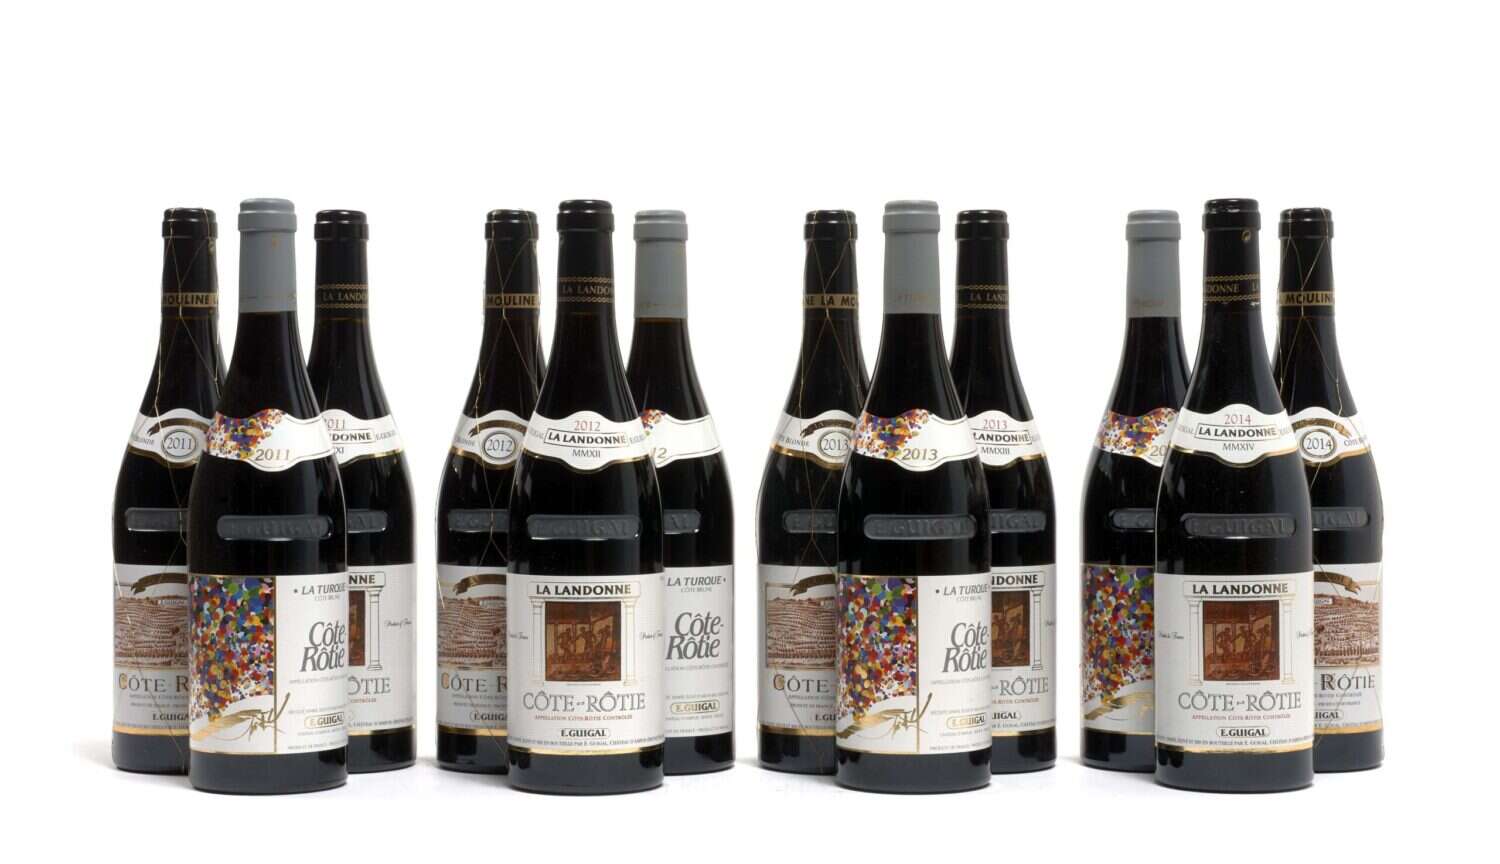 Auction item: A case of 12 bottles of Côte-Rôtie vintages offered by Domaine Guigal